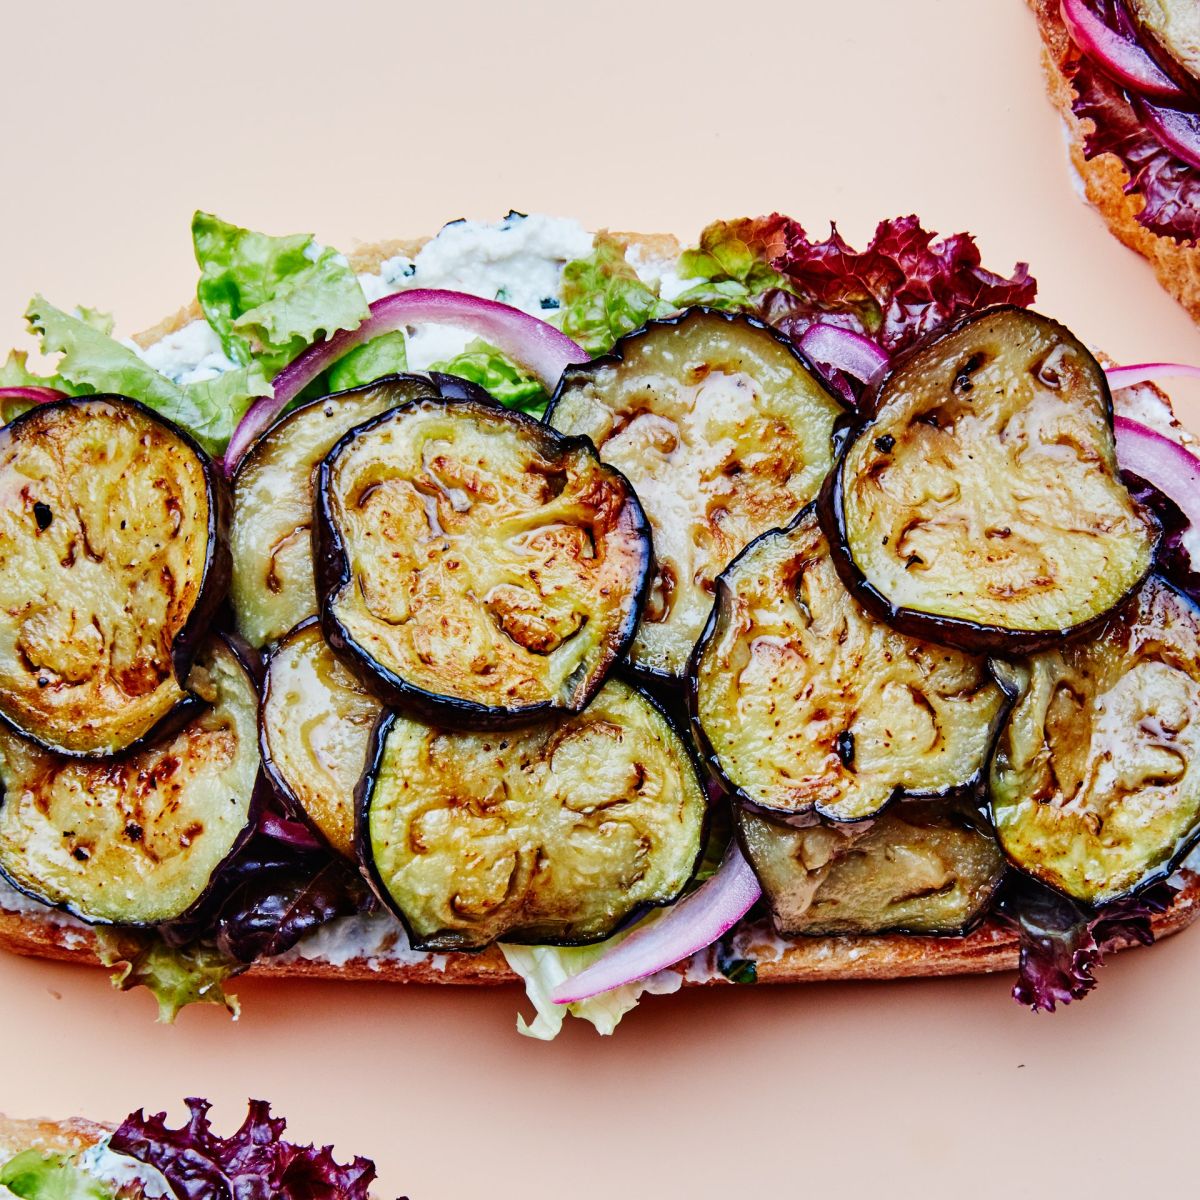 Open Faced Eggplant Sandwiches